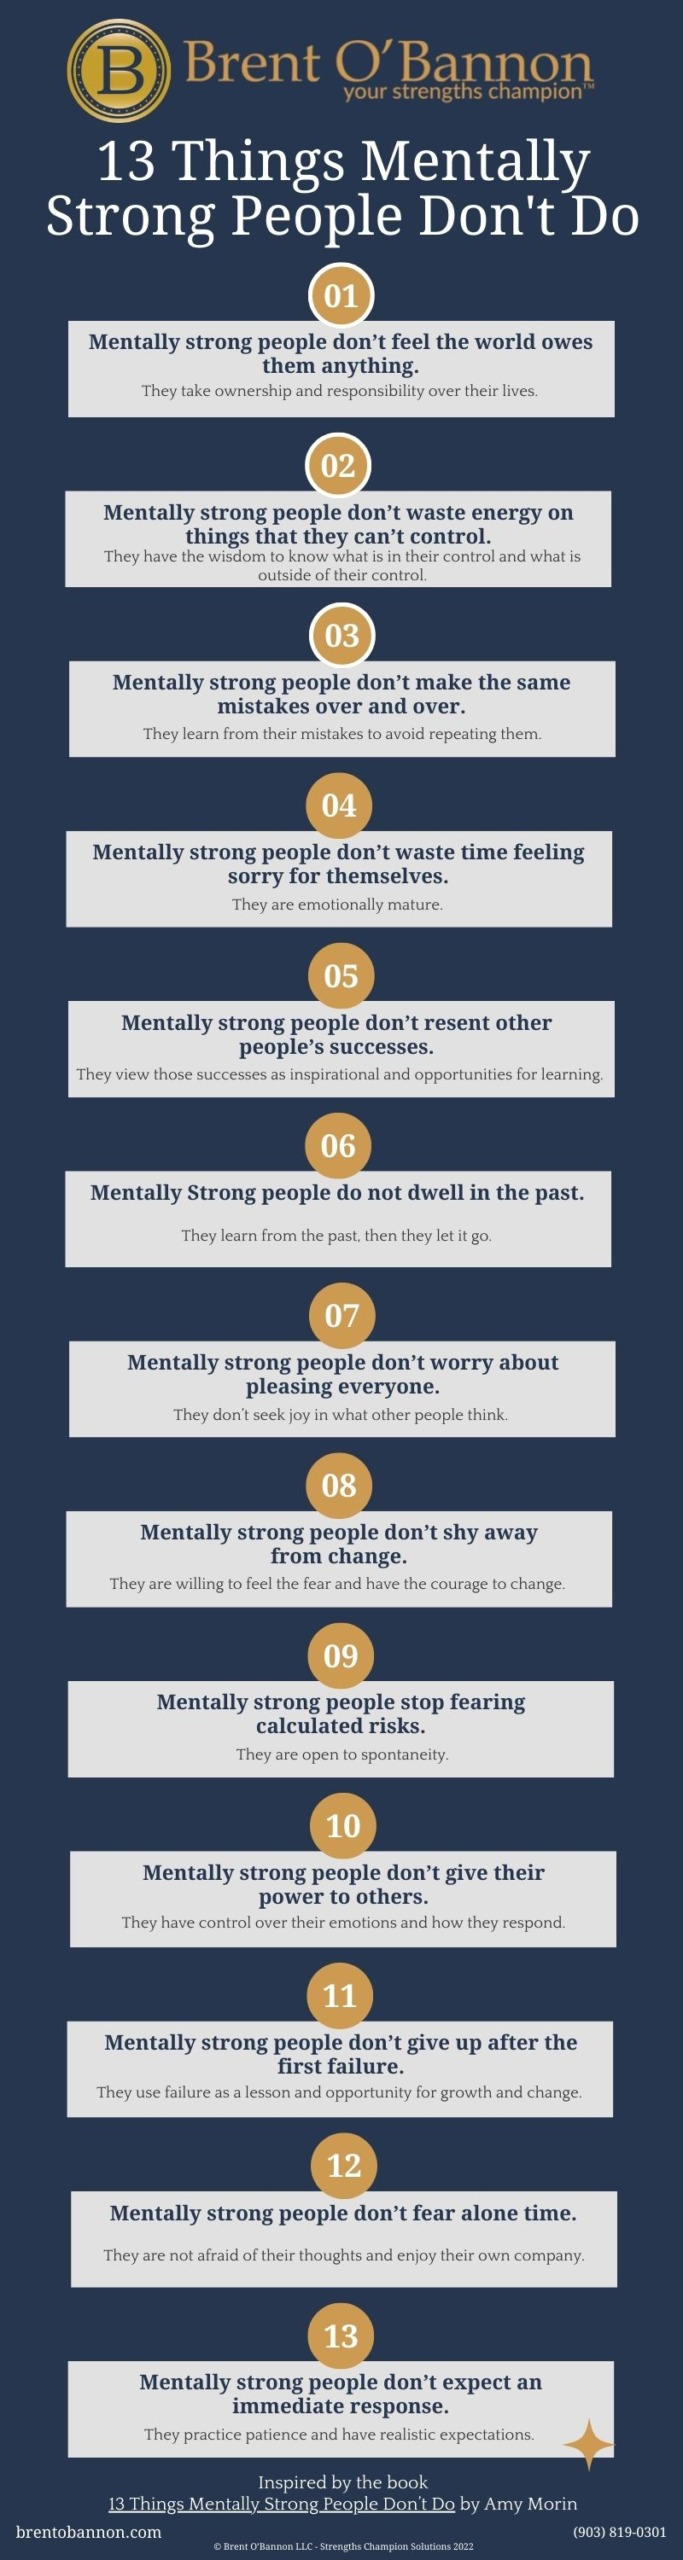 13 Things Mentally Strong People Don't Do Infographic